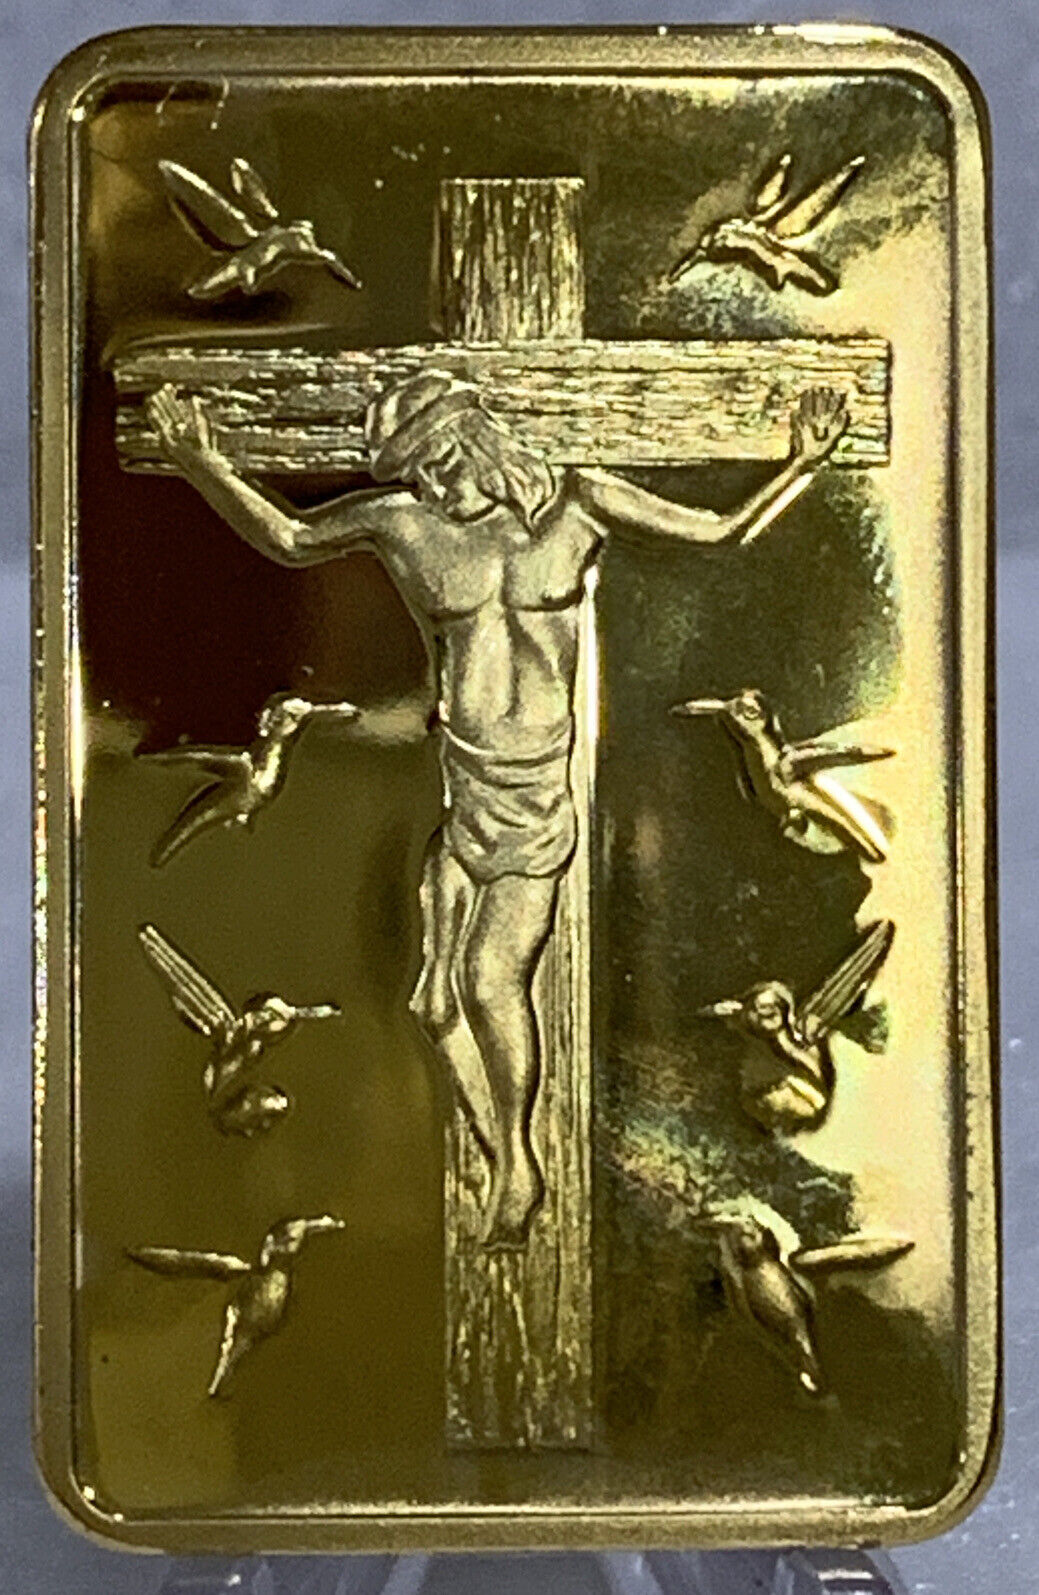 * 10 pieces of Jesus Christ Crucified & 10 Commandments Gold Plated Bar Metal